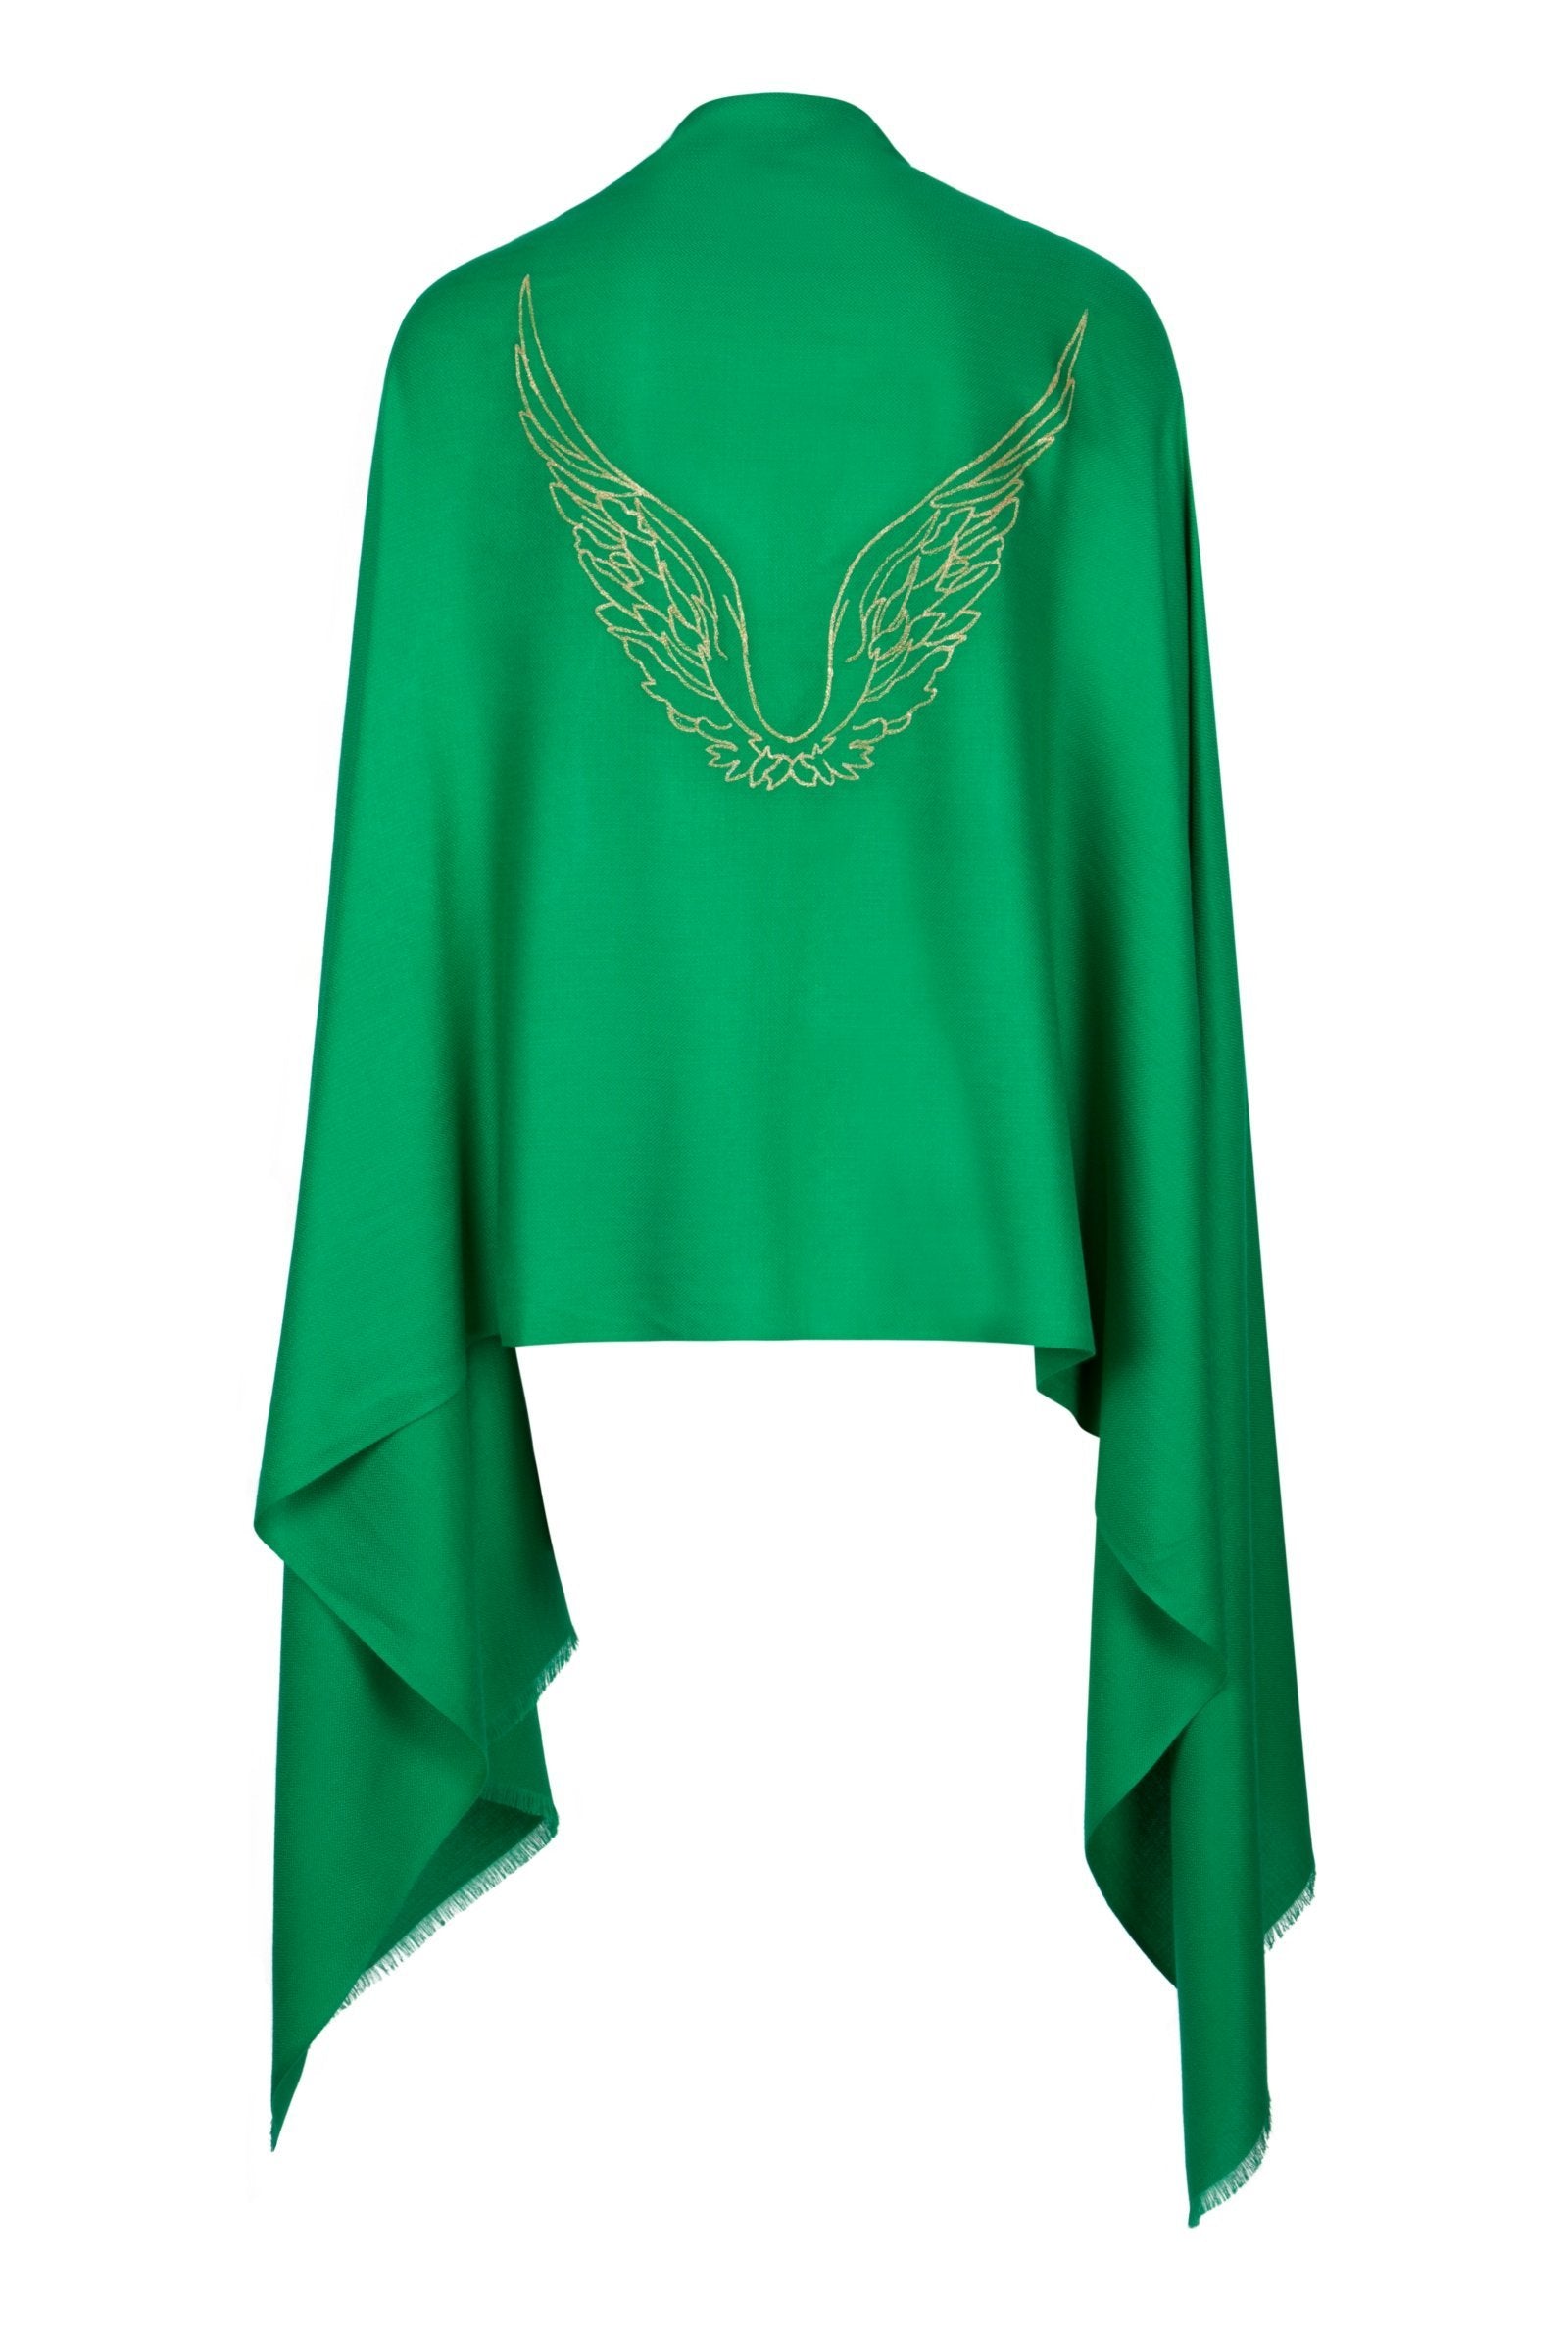 Angel Raphael Green Embroidered Wings Wrap Scarf for Healing, Travel & Guidance